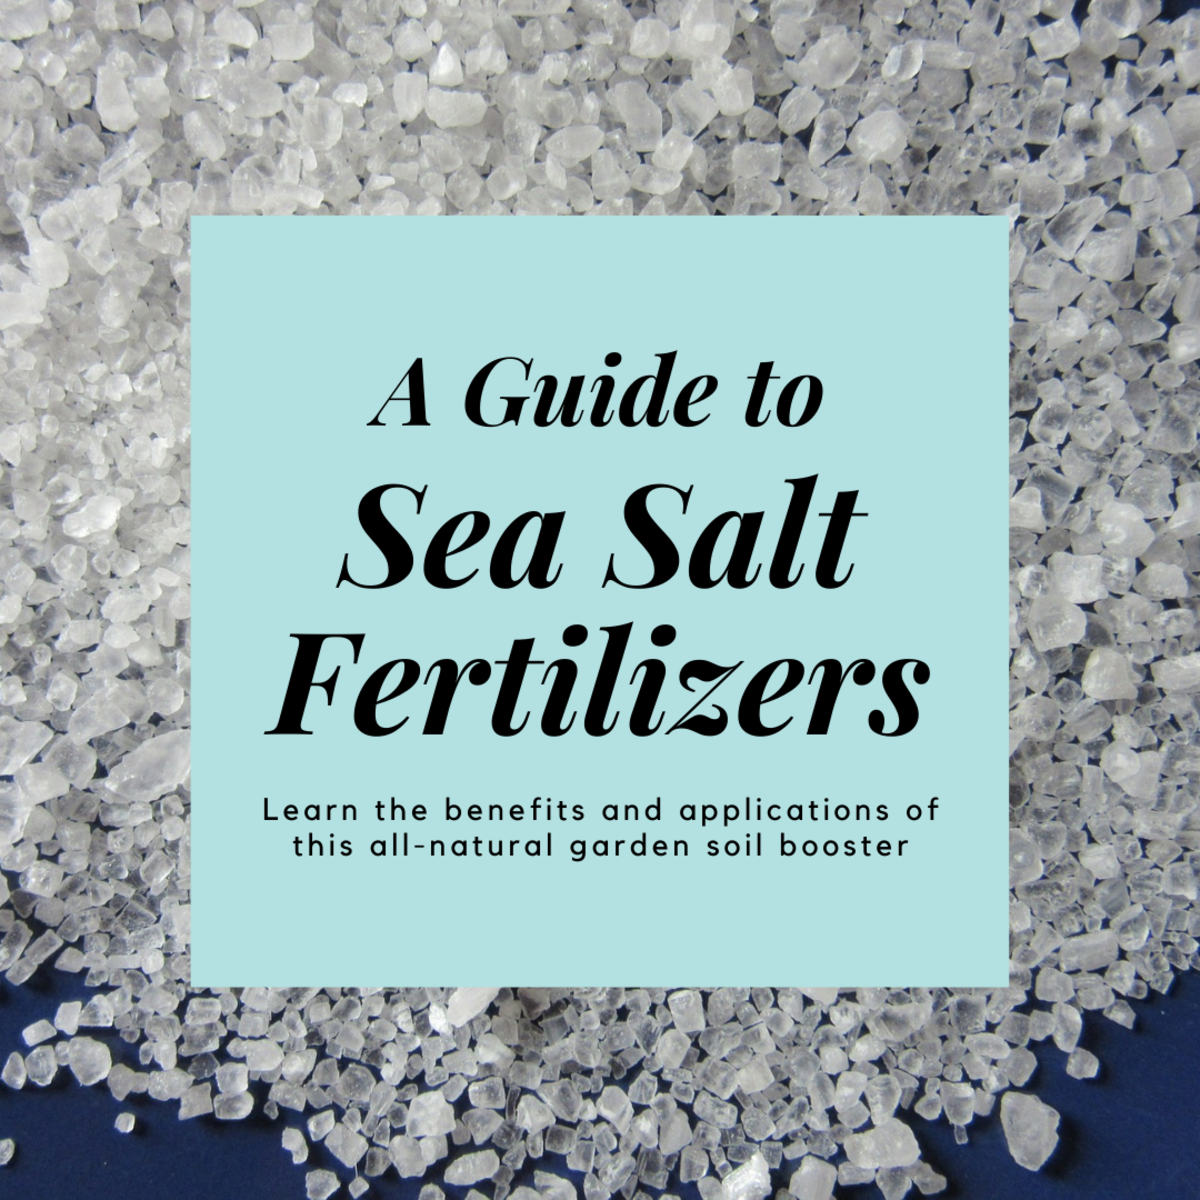 This article will provide you with plenty of information about sea salt fertilizers, including their benefits and applications.